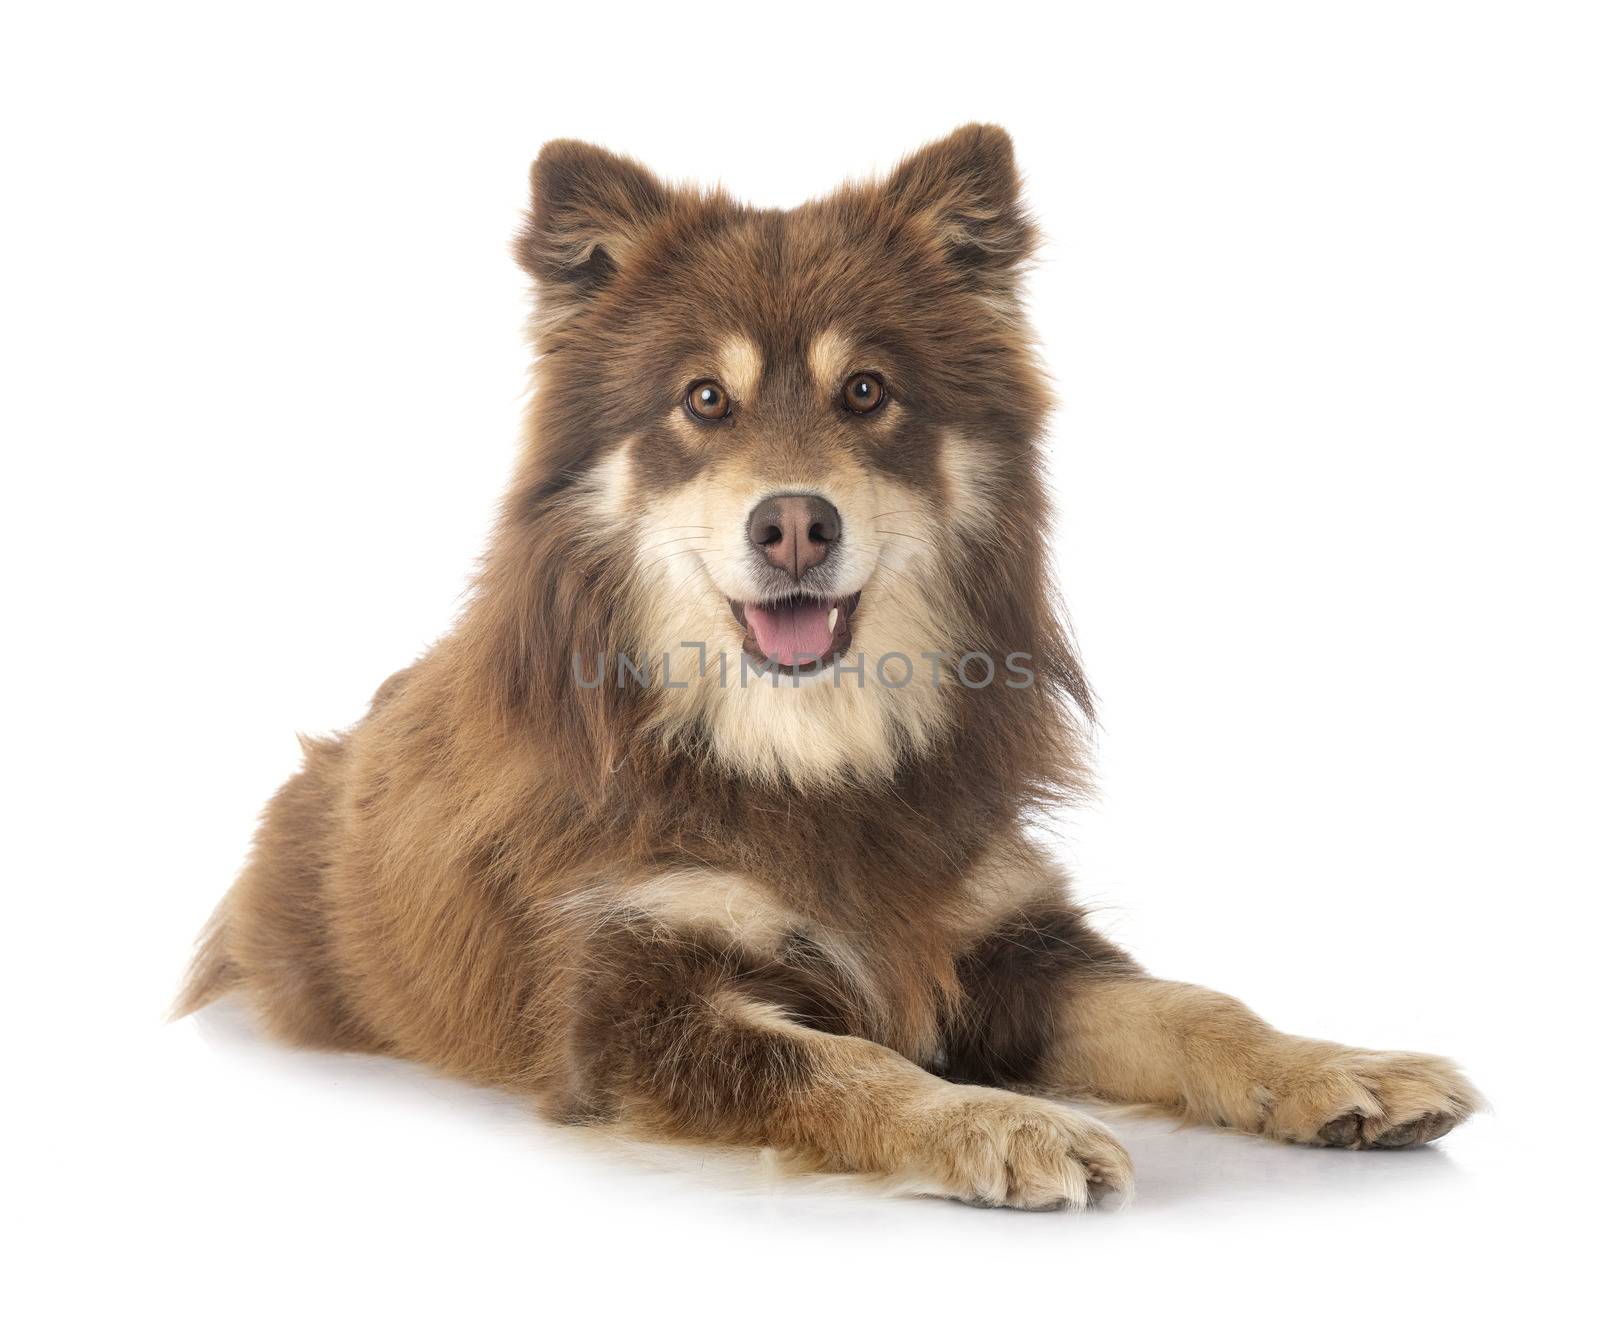  Finnish Lapphund in front of white background